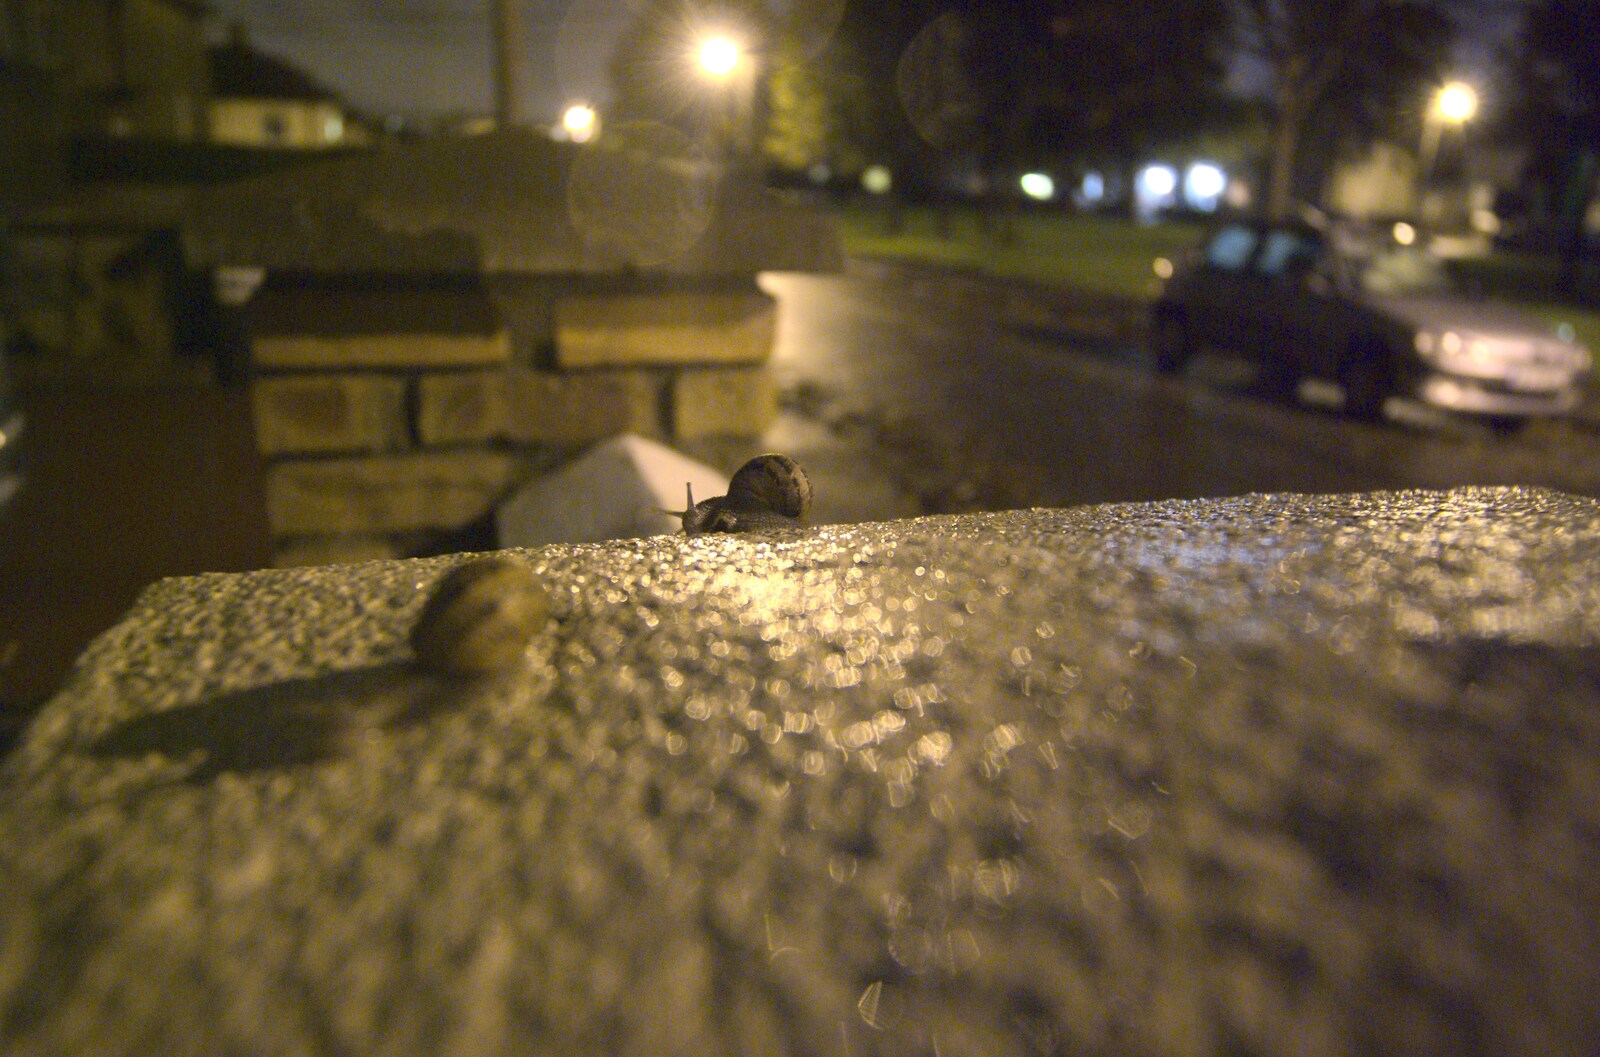 A snail trundles along a wall from A Trip to Evelyn and Louise's, Monkstown Farm, County Dublin, Ireland - October 25th 2009